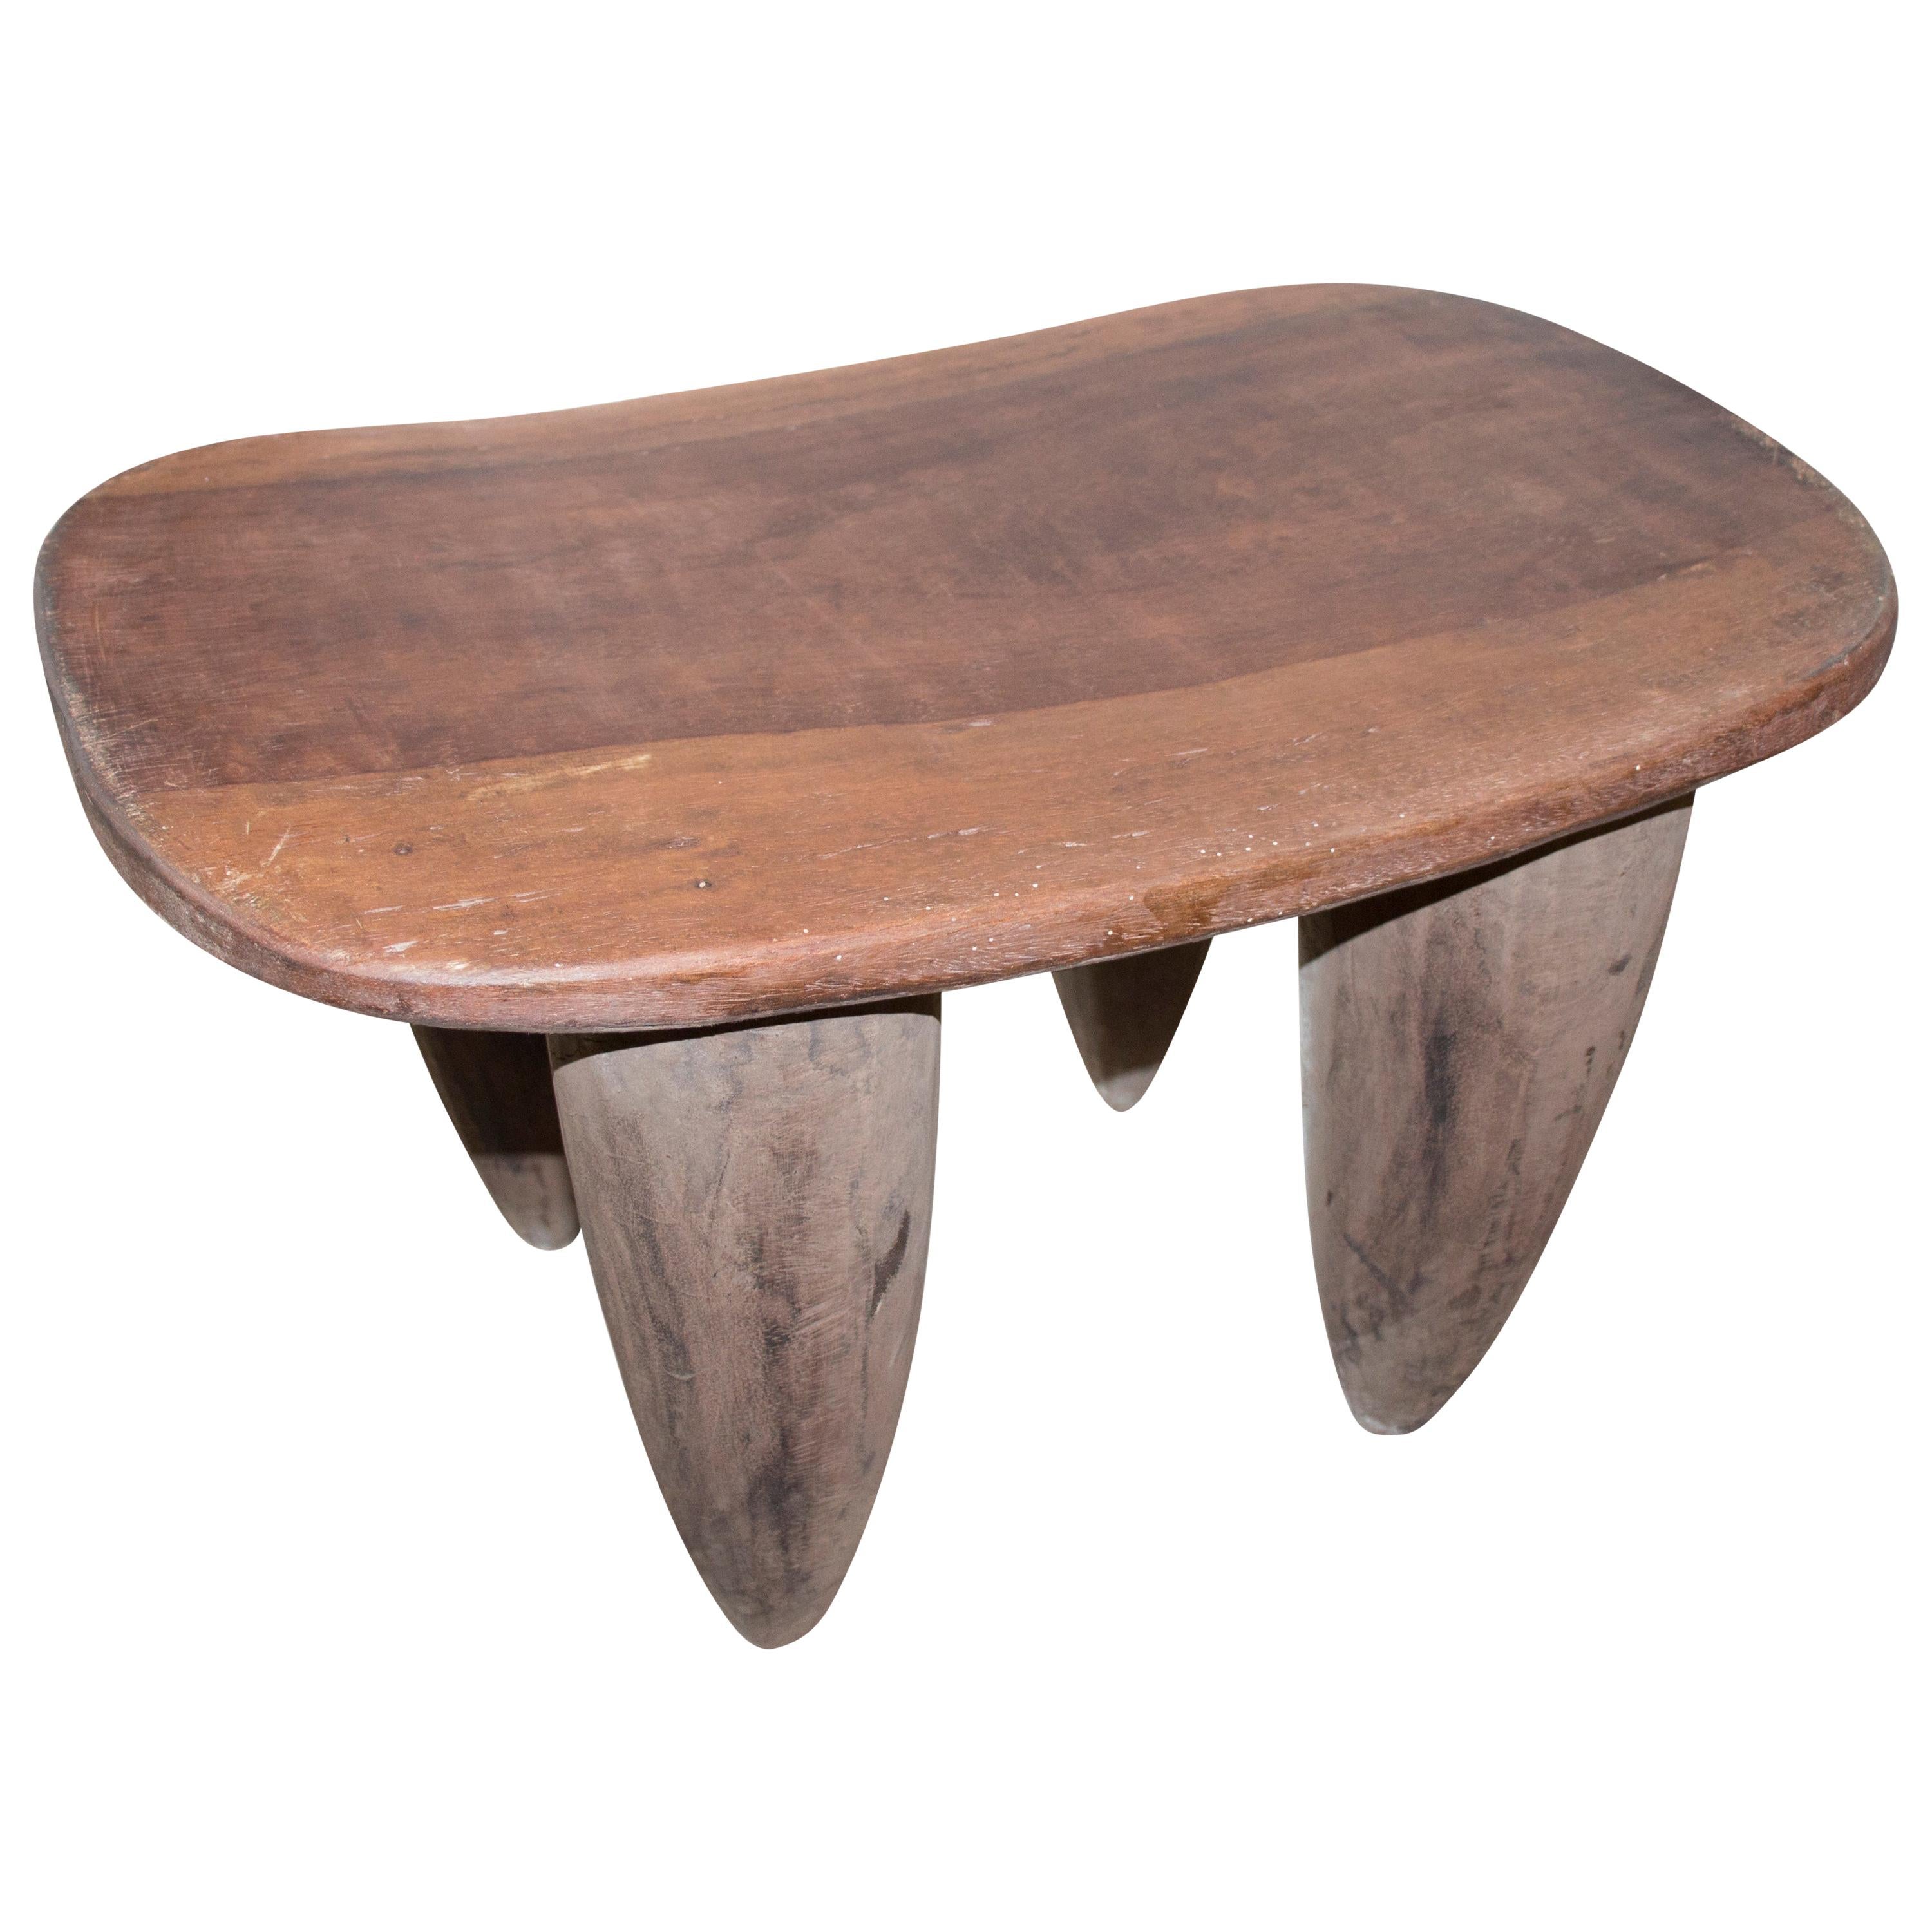 Mahogany Wood African Side Table or Stool